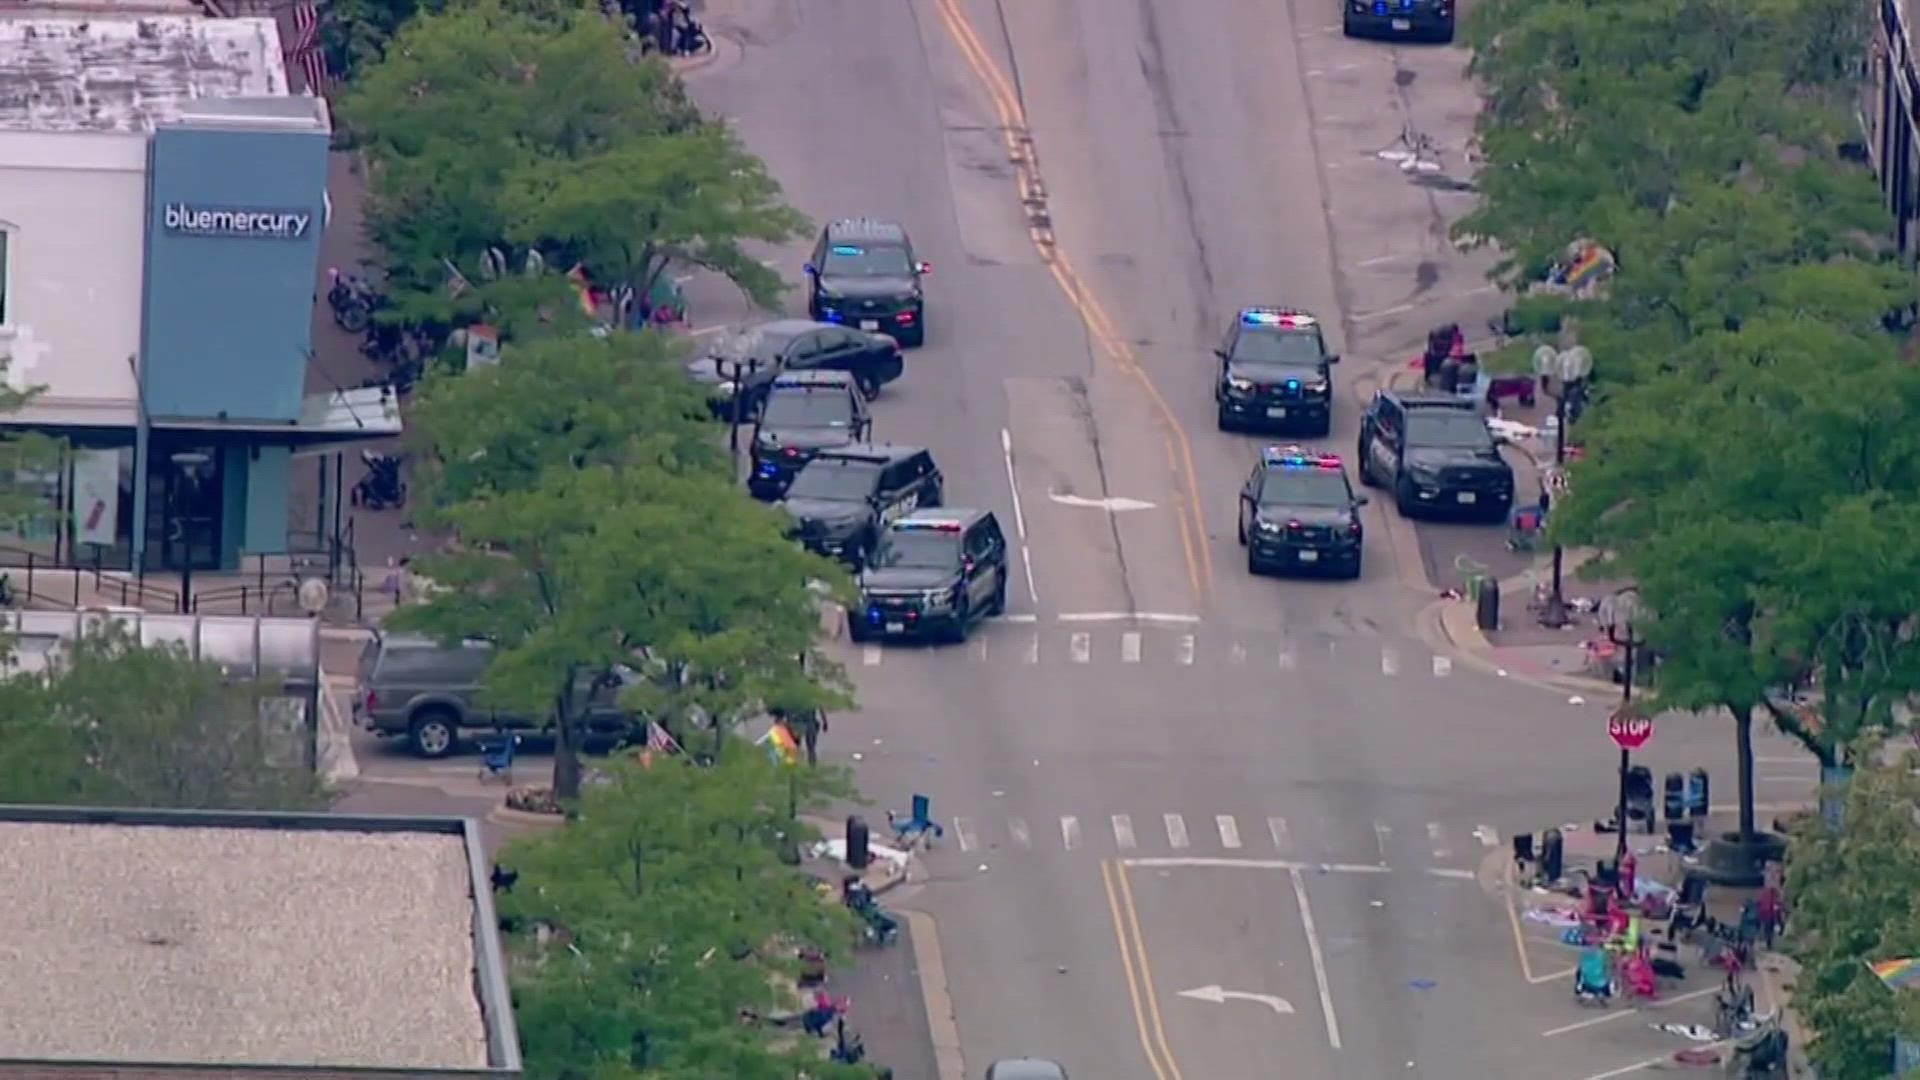 The gunman who opened fire on the Highland Park parade from a rooftop is not in custody, according to officials.